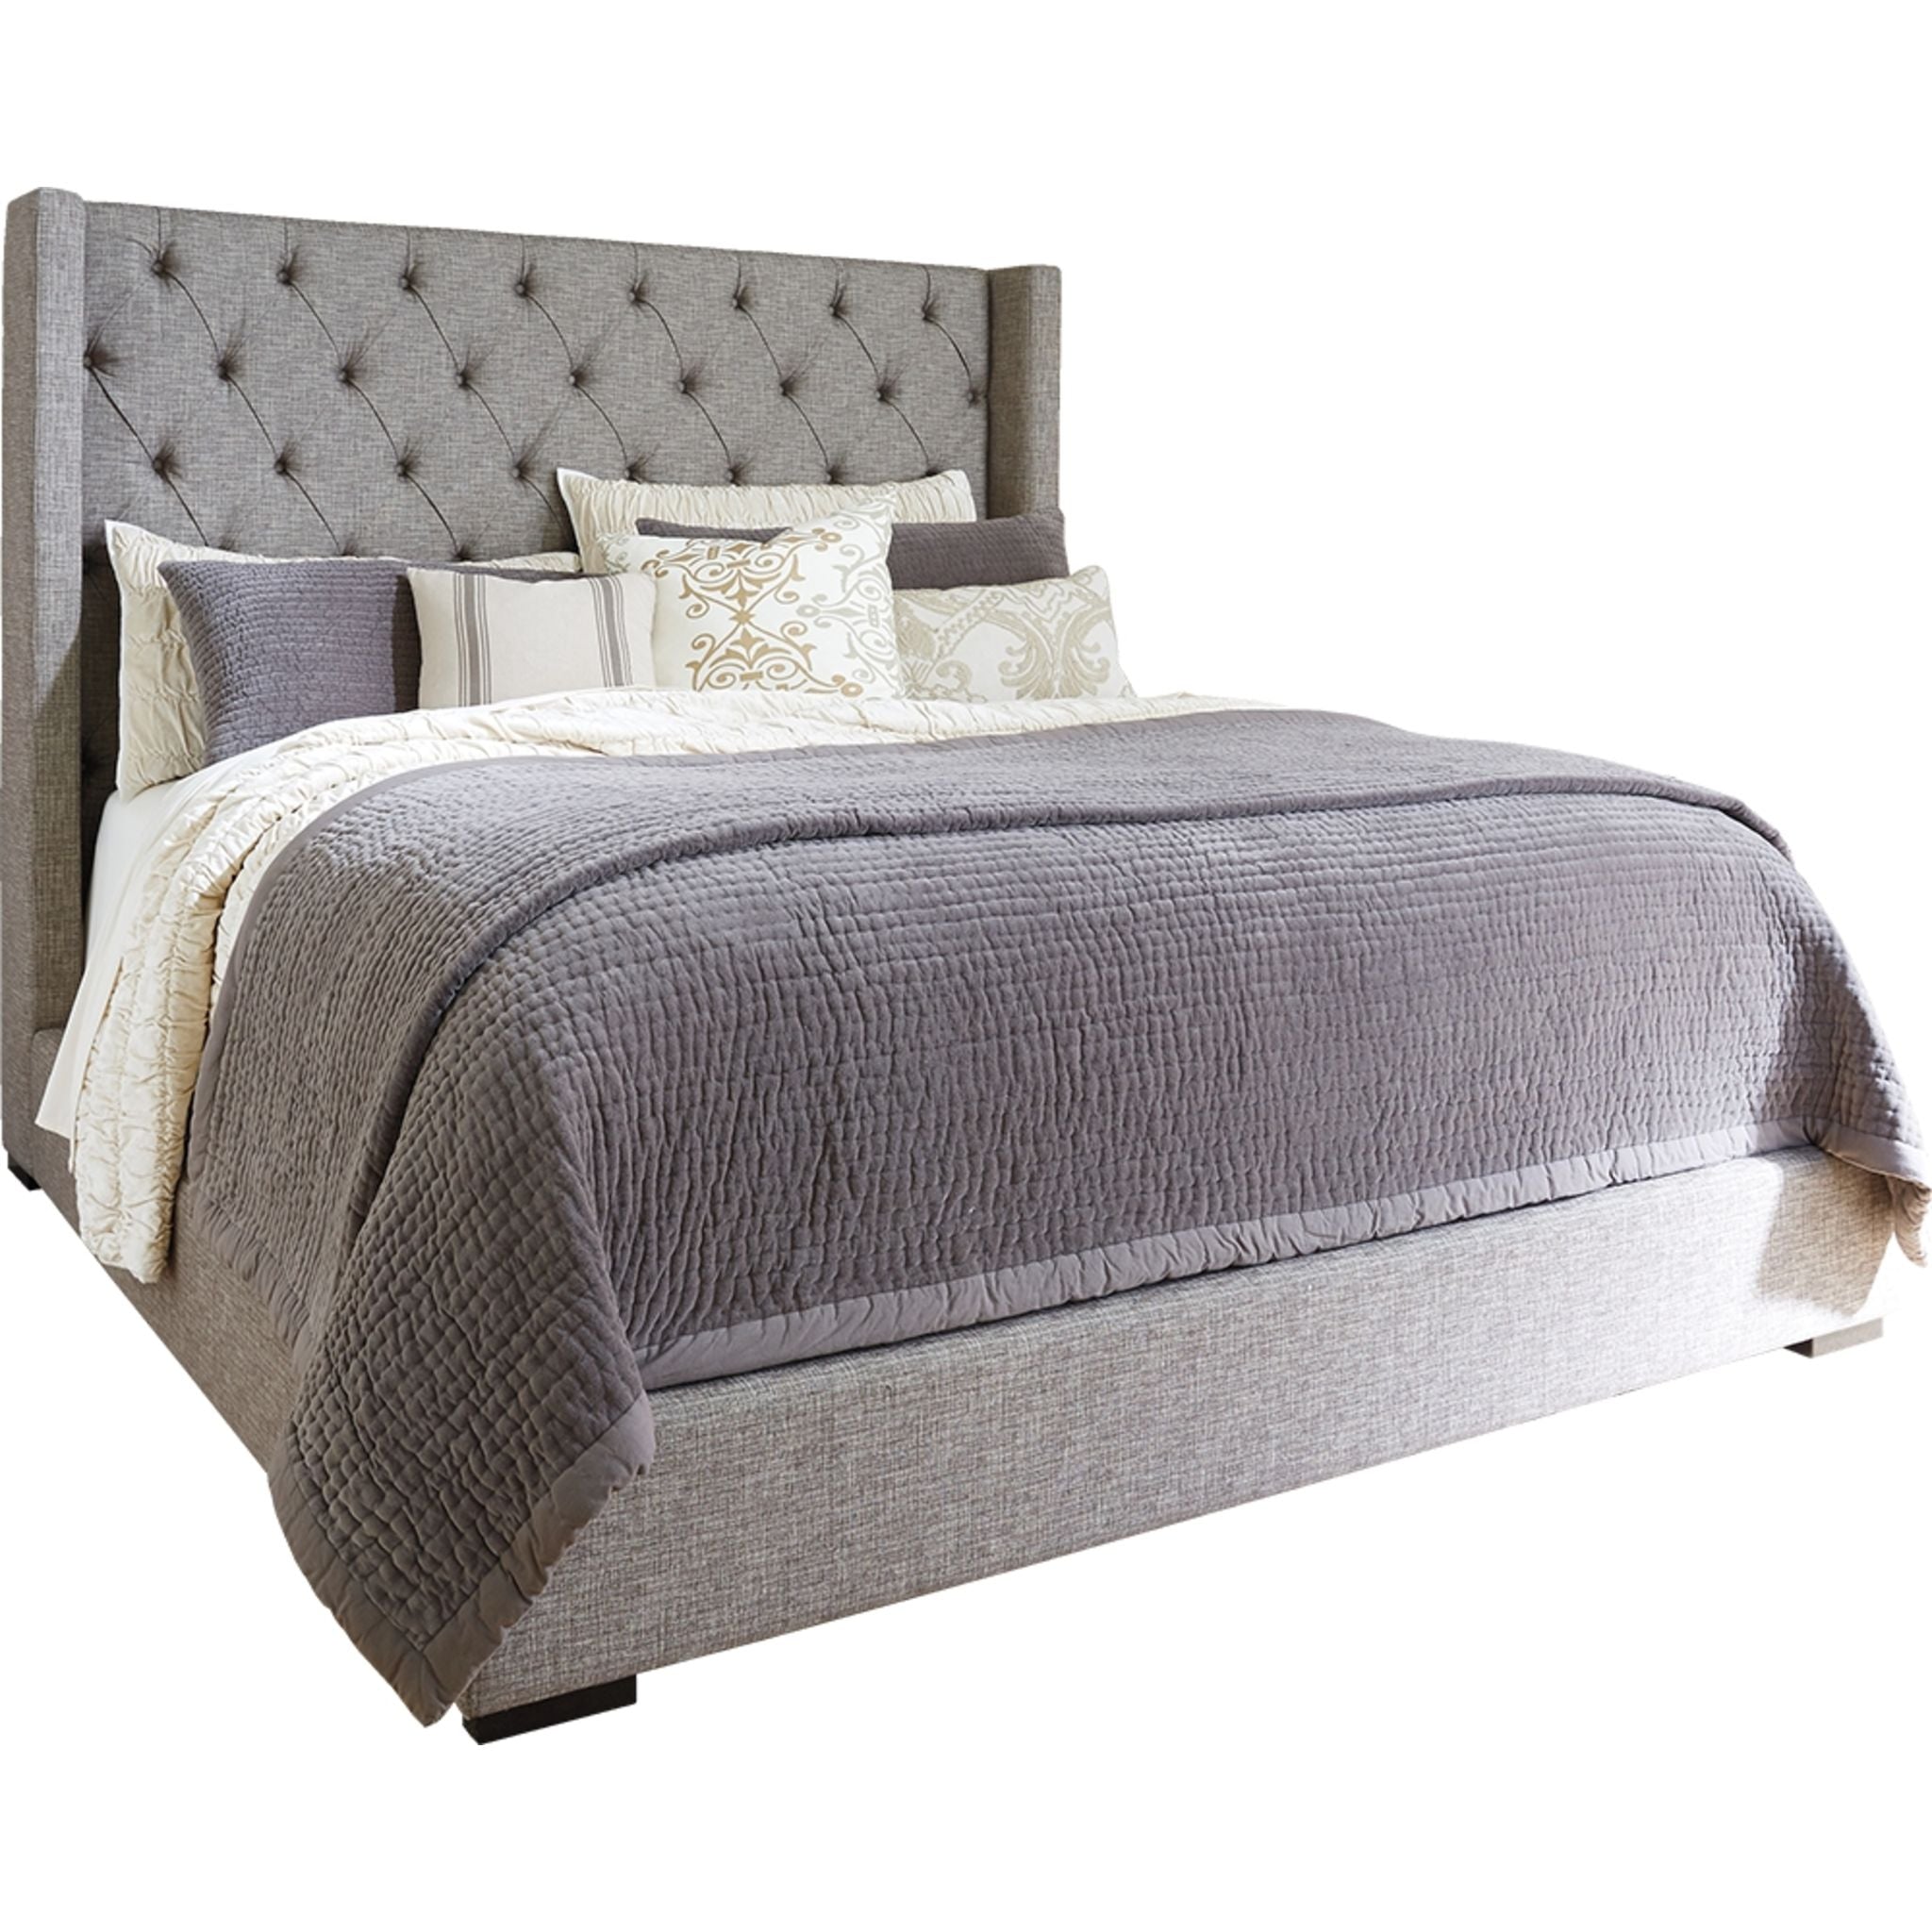 Sorinella Exclusive 3 Piece Upholstered Bed Ashley Homestore Canada